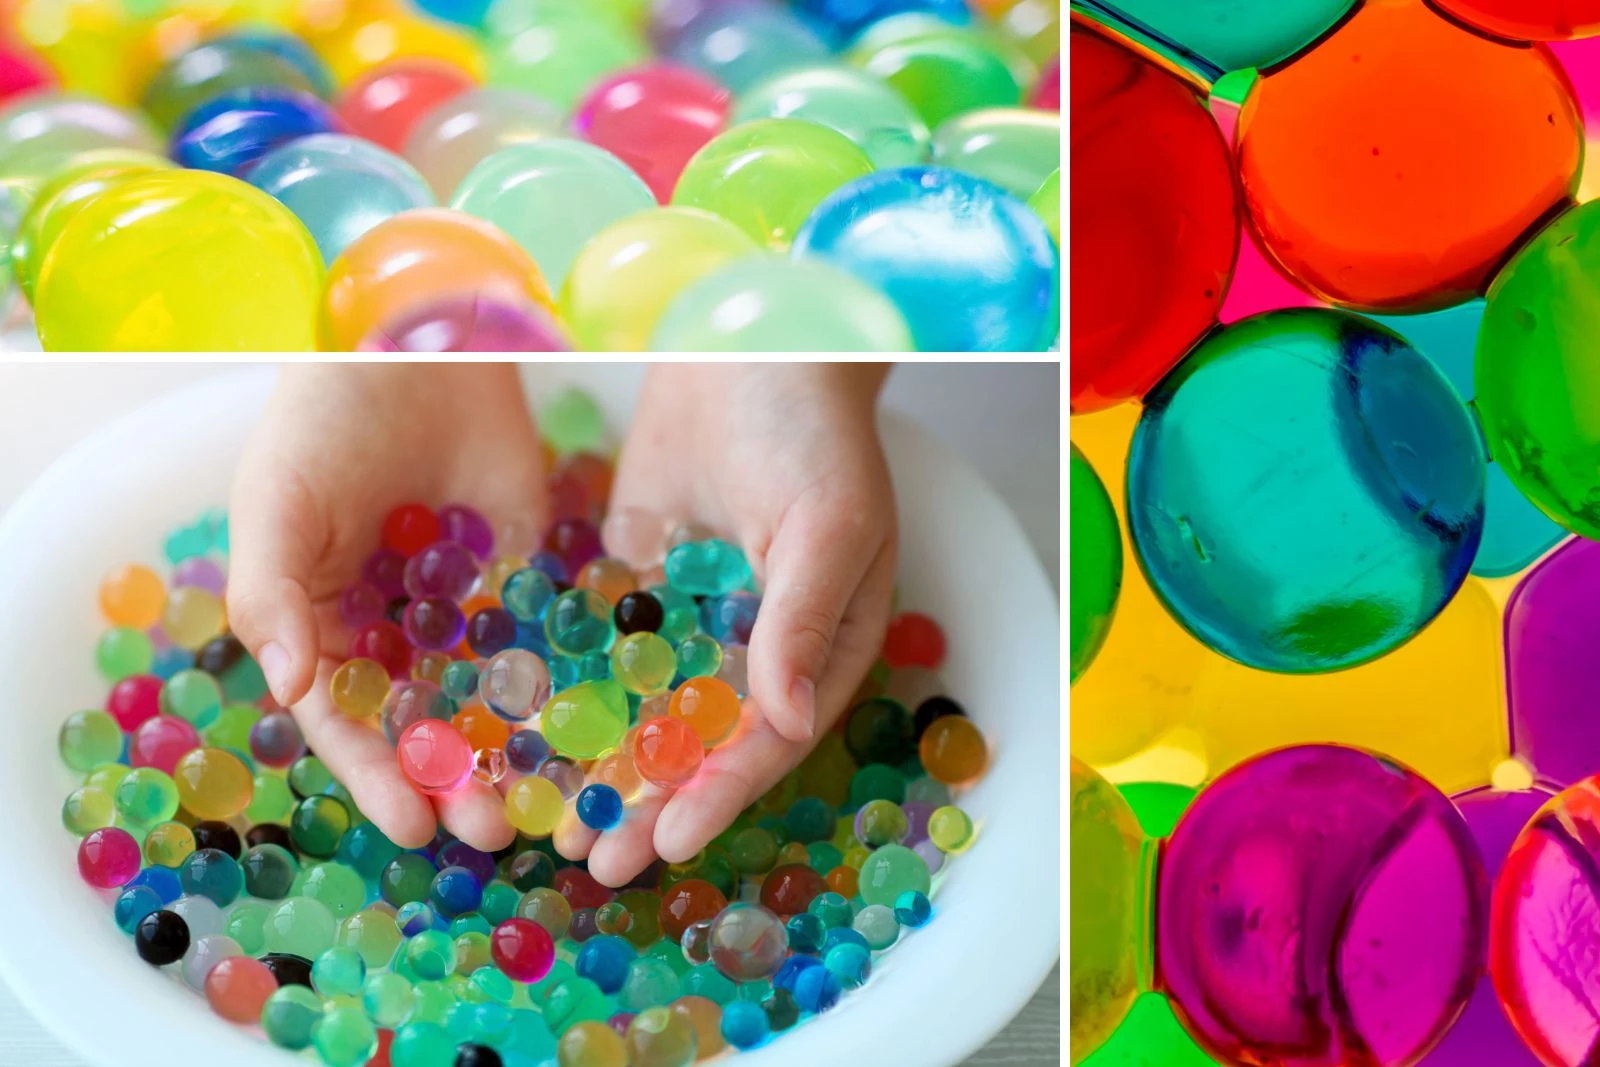 Orbeez Unveiled: What Are They and How Can You Use Them?